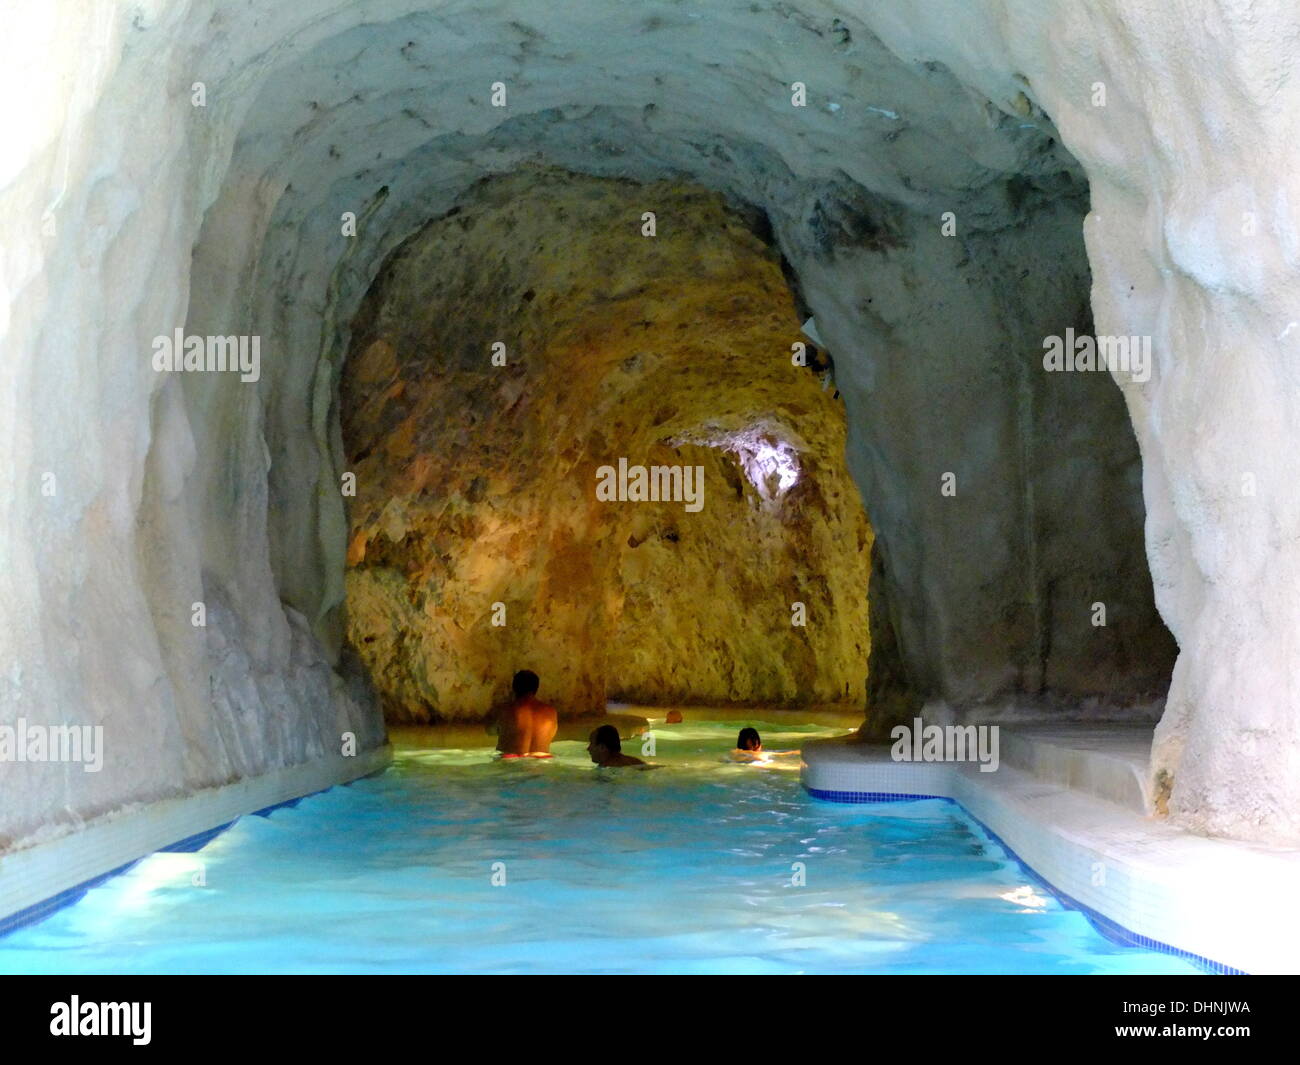 Miskolc , Hungary 10th, November 2013 Miskolc Topolca cave baths with hot termal water, made in natural caves. People walk and swim in kind of canals made in the caves and enjoy hot therapeutic water. Stock Photo